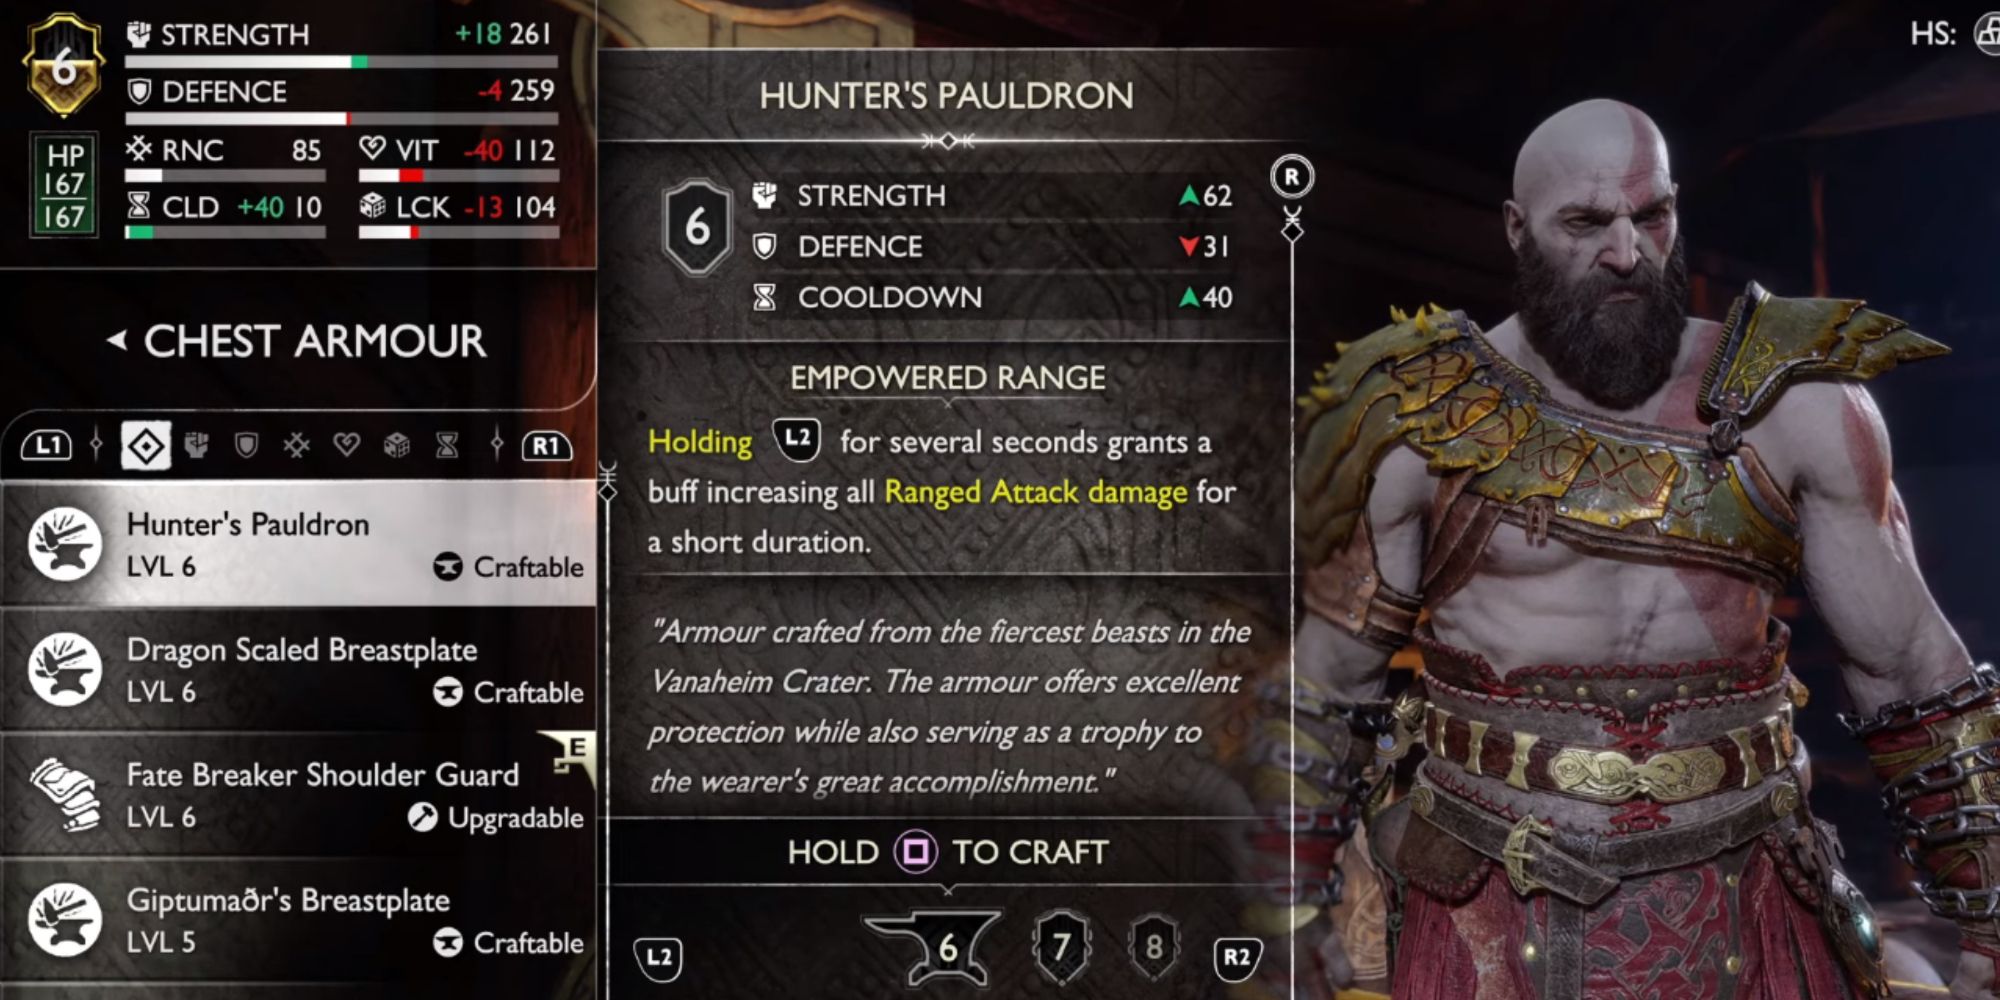 Image showing information on the Hunter's Pauldron.